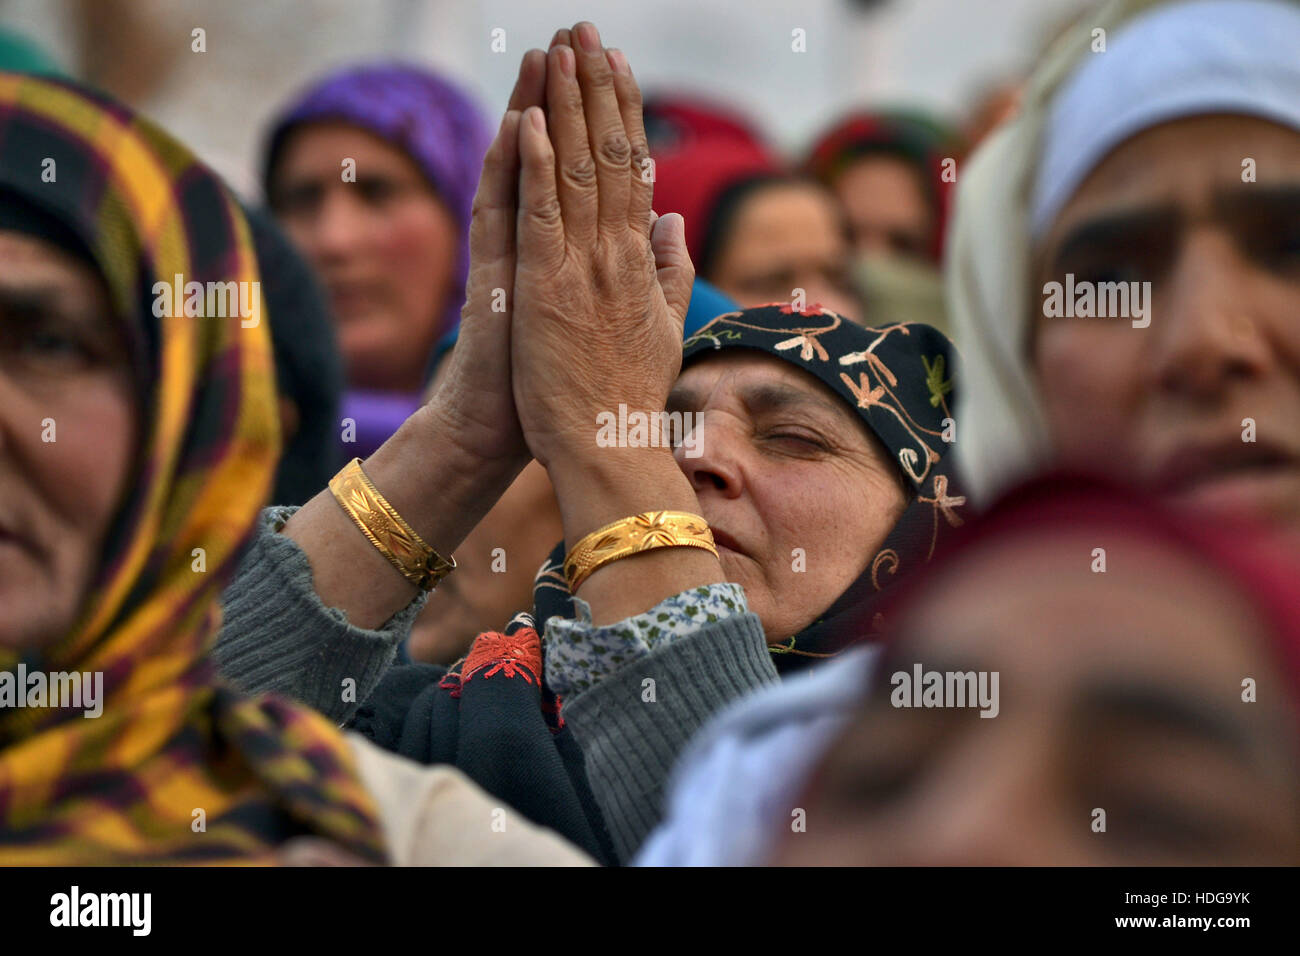 Kashmir. 12th Dec, 2016. Kashmiri Muslim women react as an unseen priest displays a holy relic believed to be the hair from the beard of Prophet Mohammed at the Hazratbal shrine on the occasion of a festival that commemorates the birthday of Prophet Muhammad in Srinagar, Indian-administered Kashmir. Credit:  Saqib Majeed/Alamy Live News Stock Photo